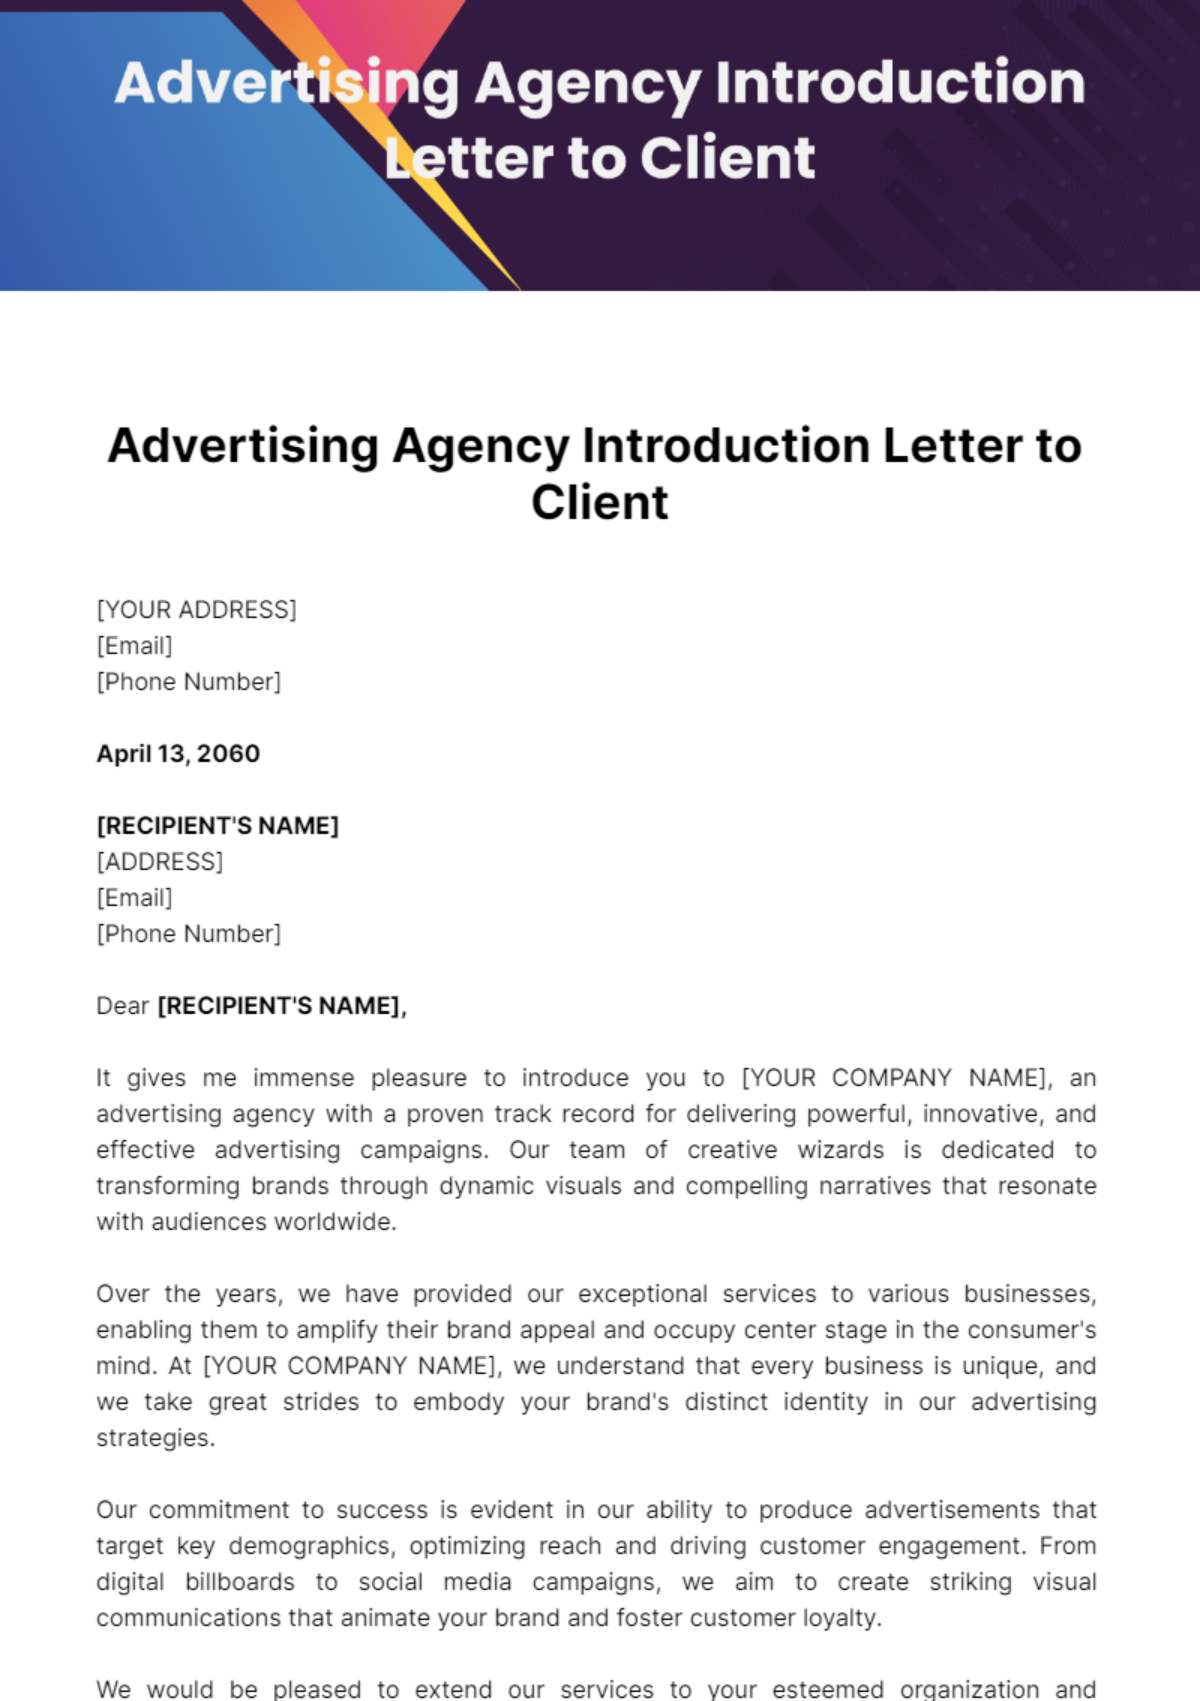 Free Advertising Agency Introduction Letter to Client Template